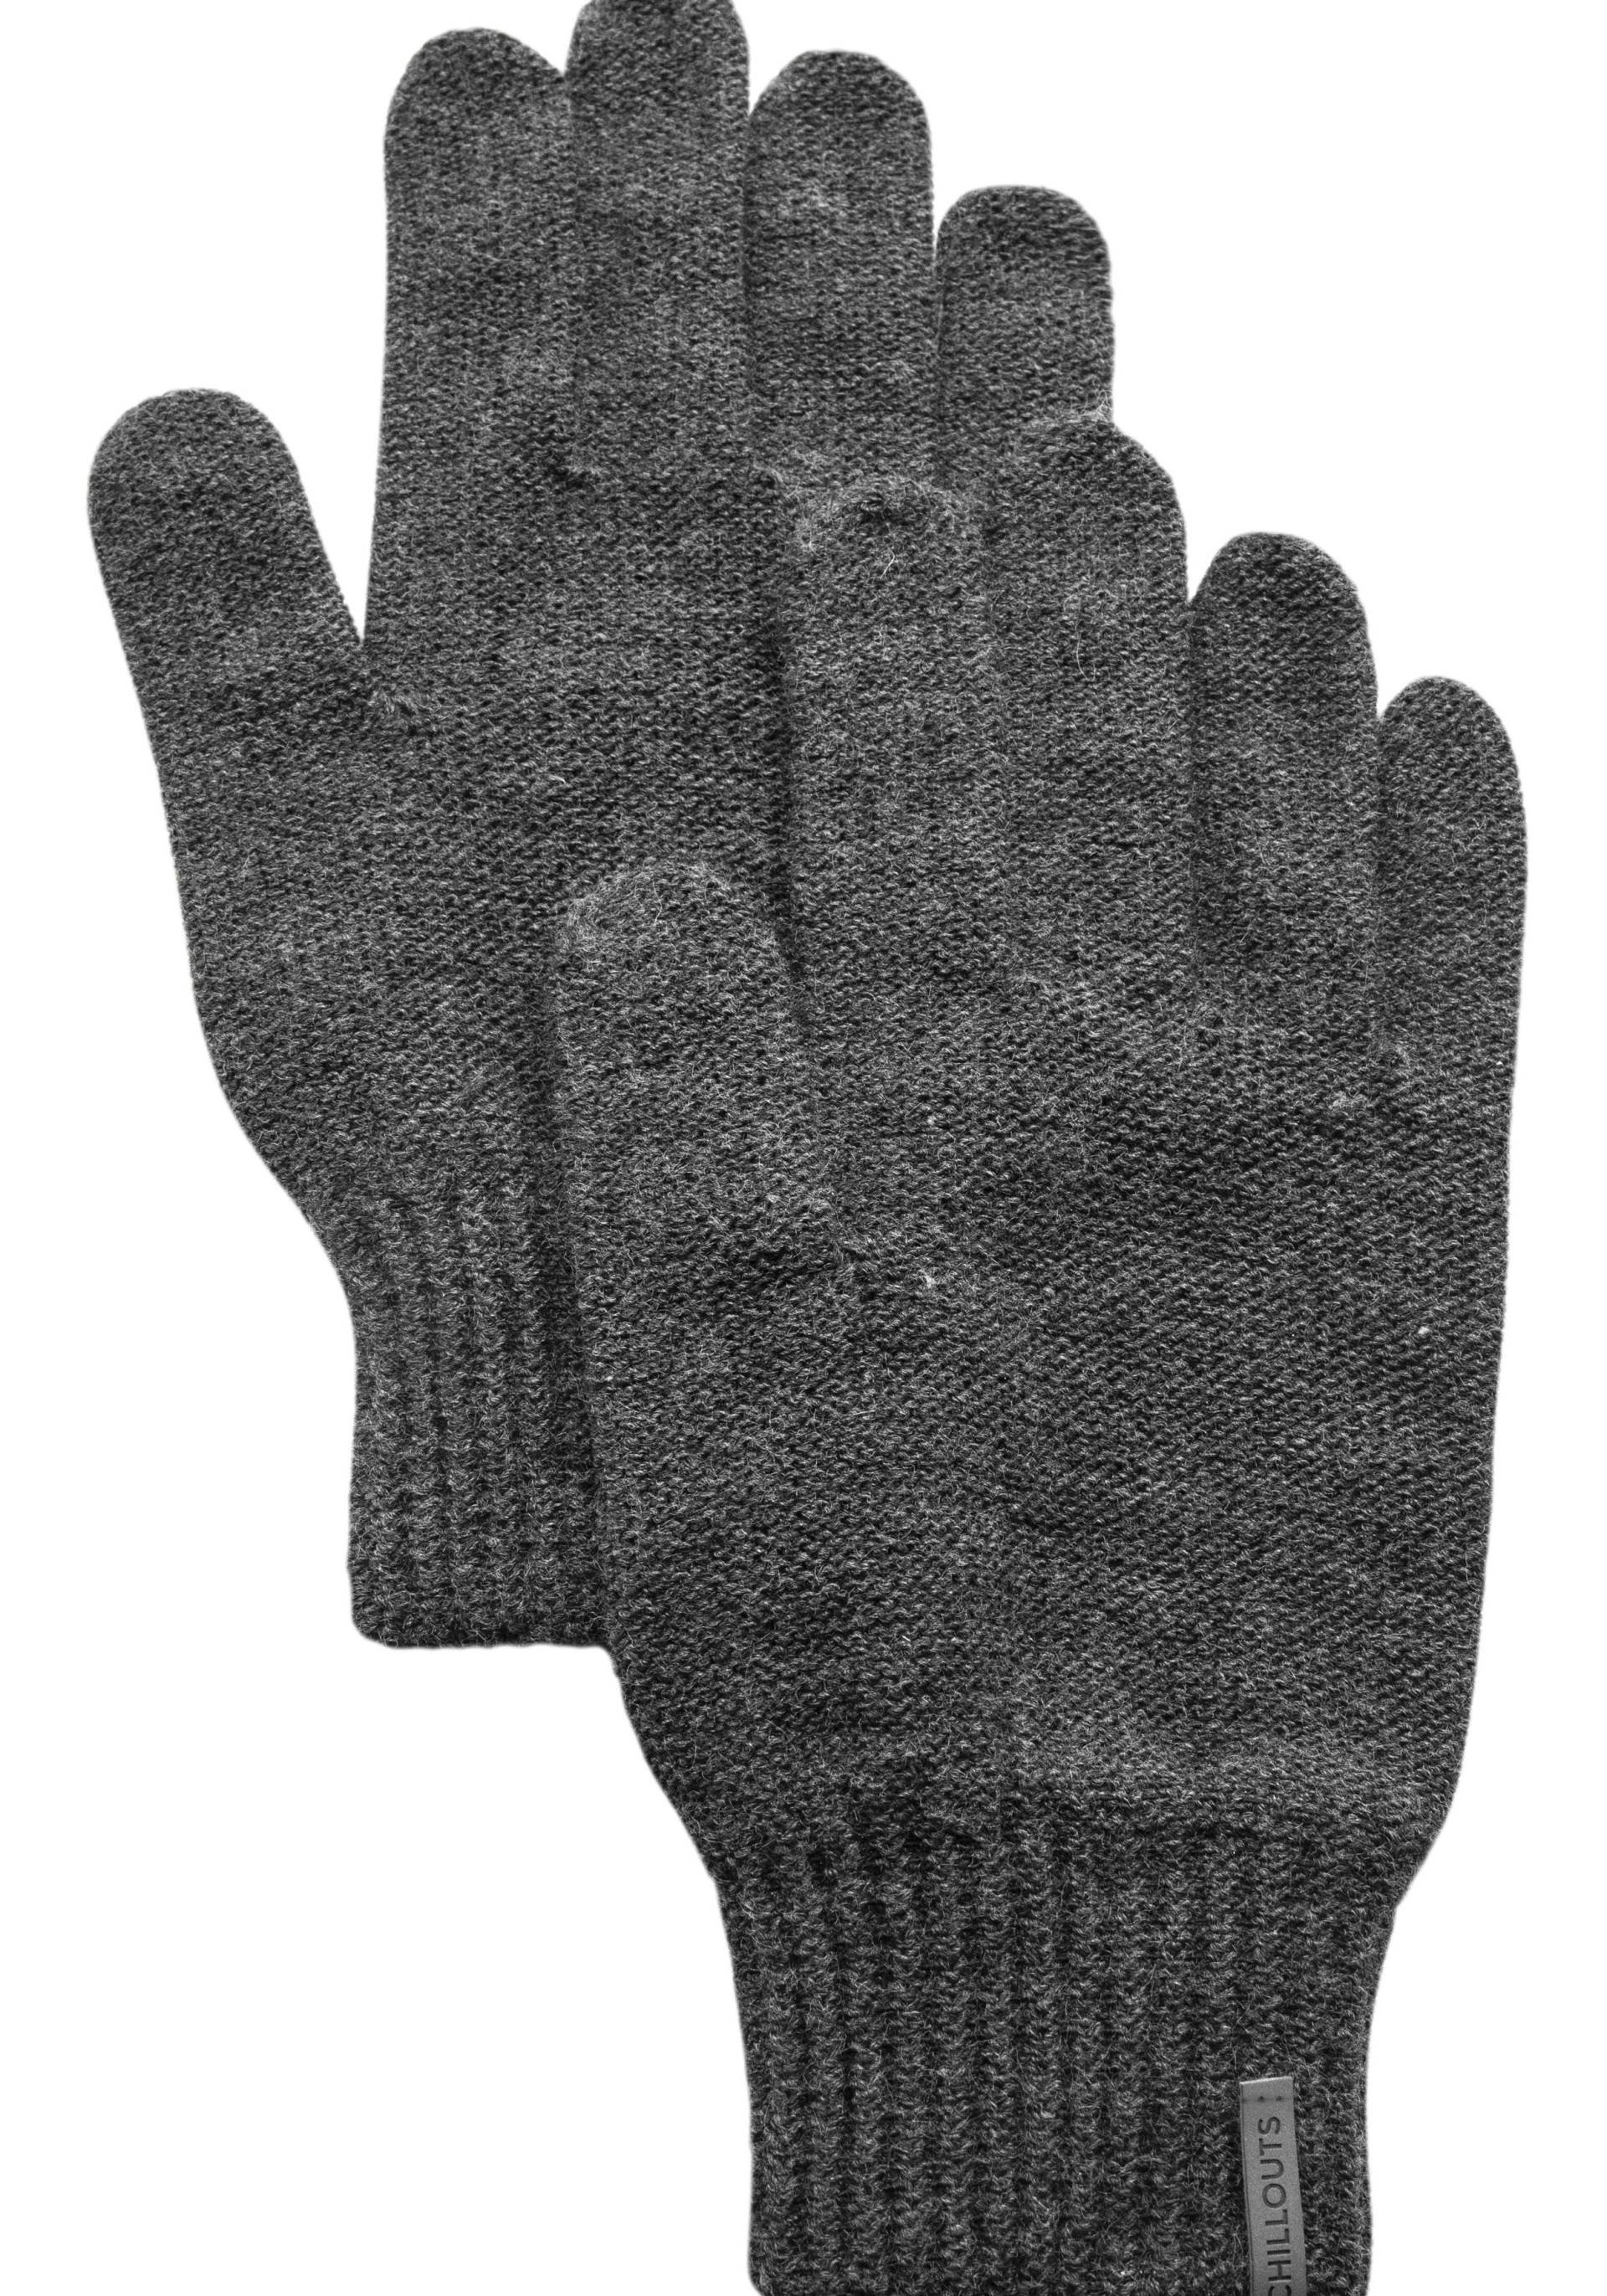 chillouts Strickhandschuhe »Perry Glove«, (2 St.), Fingerhandschuhe gestrickt, wärmend von chillouts